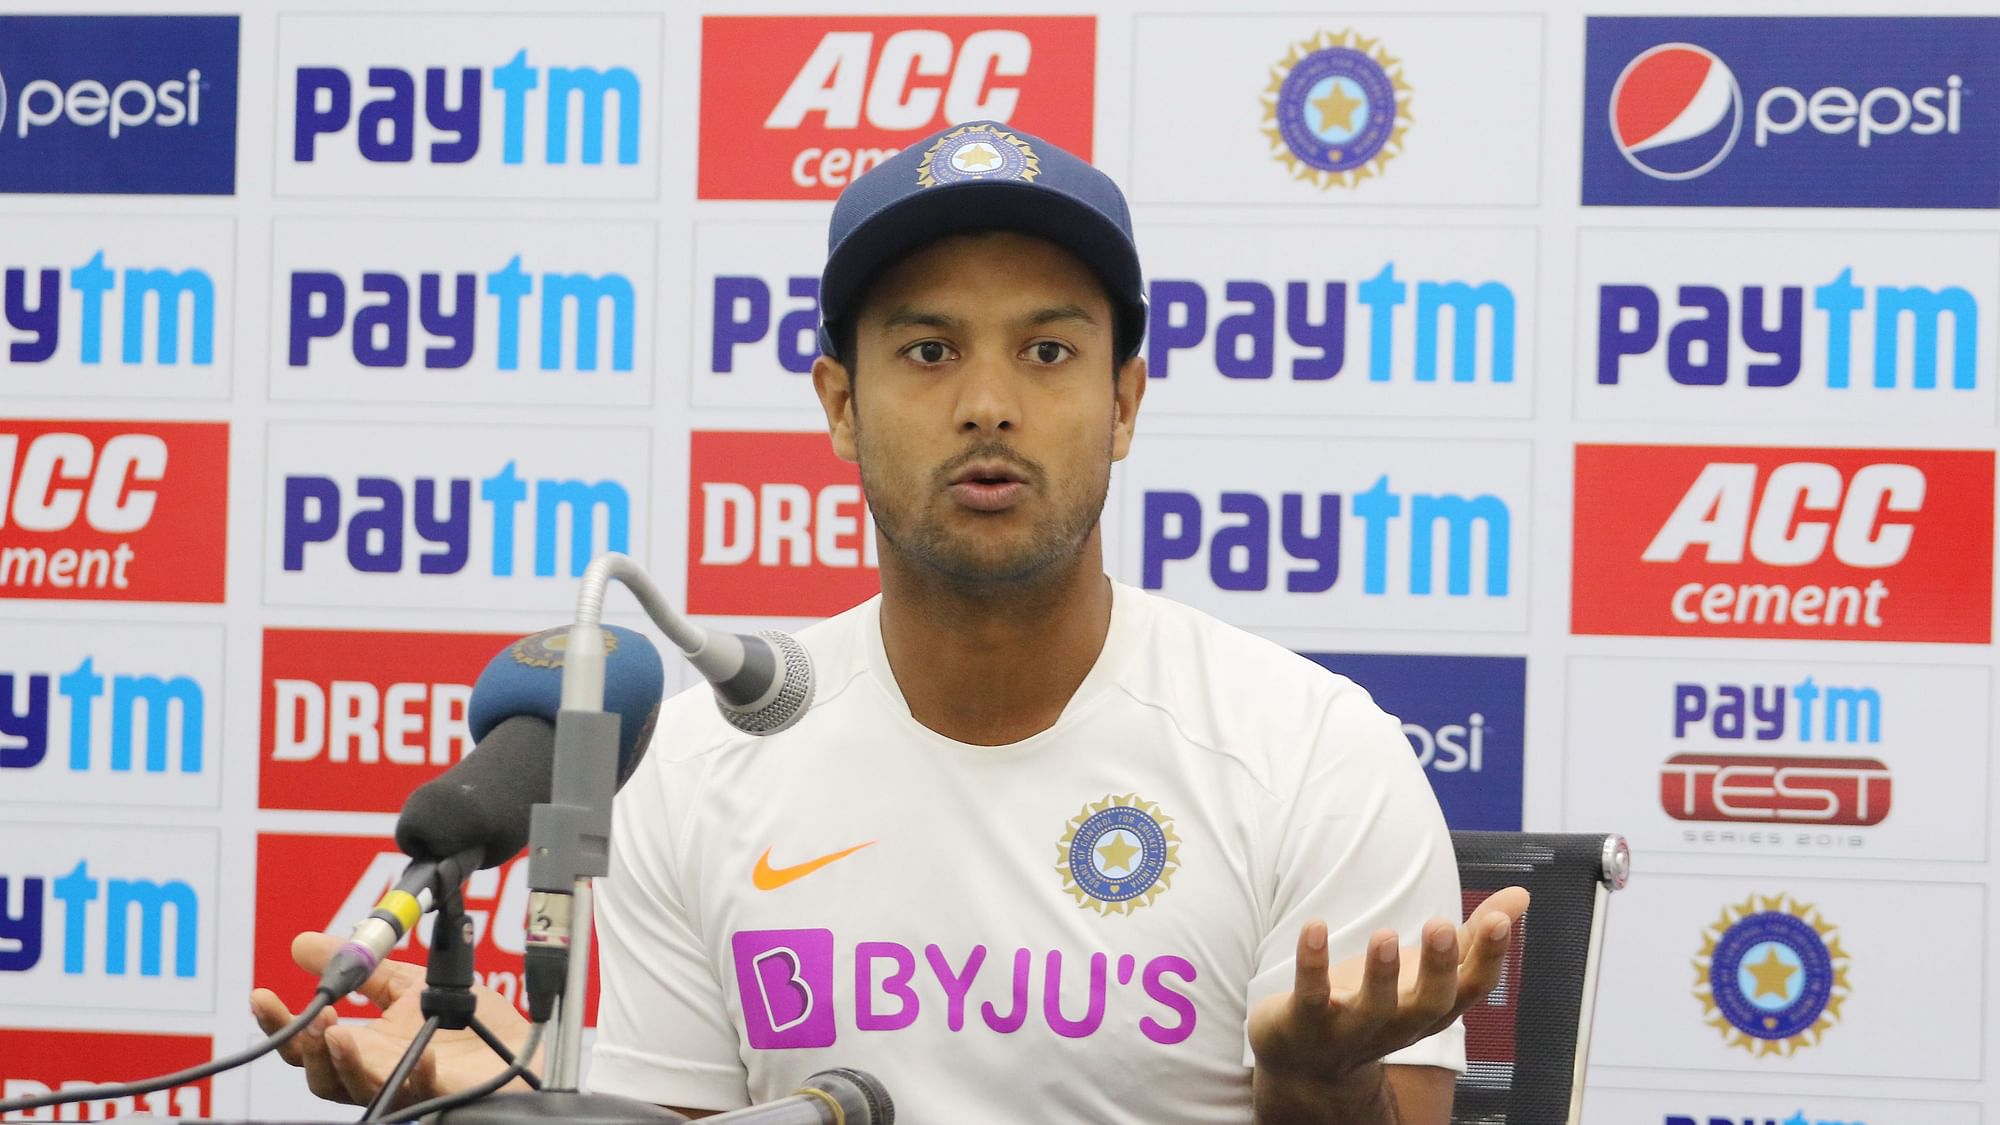 India opener Mayank Agarwal said overcoming fear of failure has made him hungrier for runs as he smashed his career-best second double hundred.